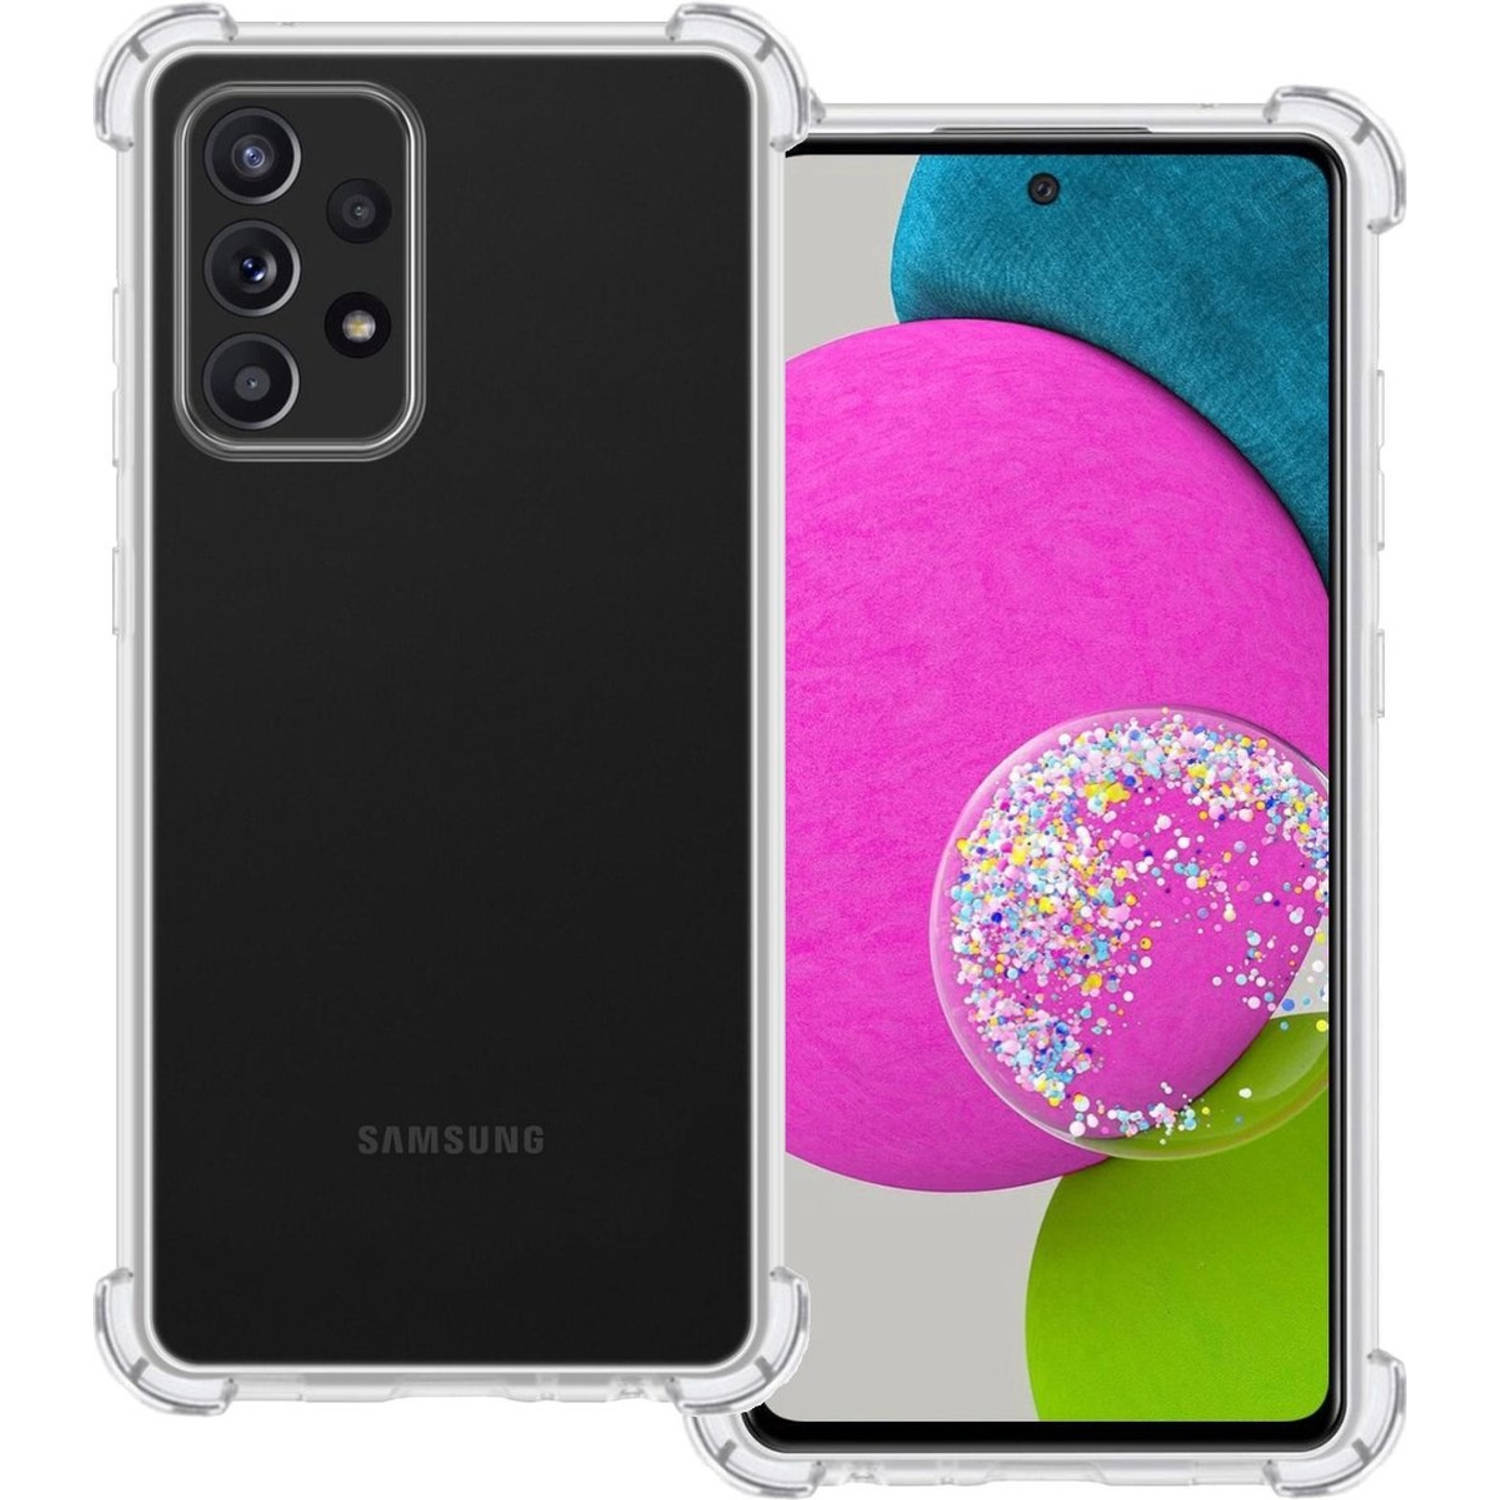 Basey Samsung Galaxy A52 Hoesje Siliconen Shock Proof Hoes Case Cover Transparant